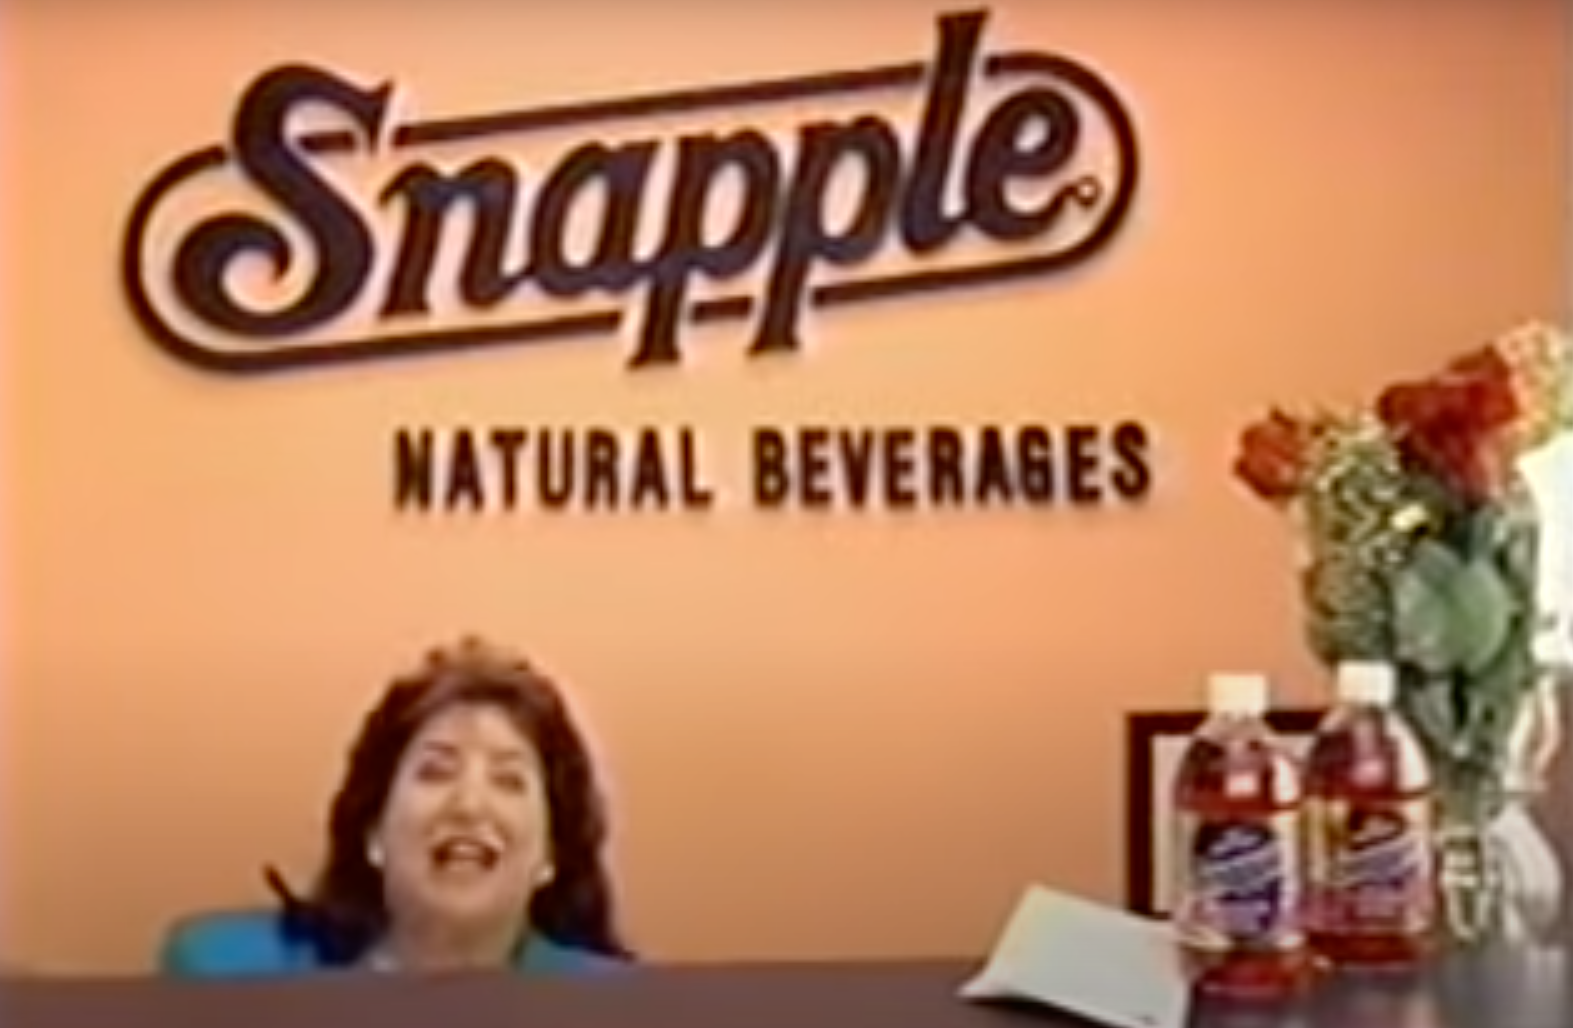 A lady behind a receptionist desk and a Snapple logo on the wall